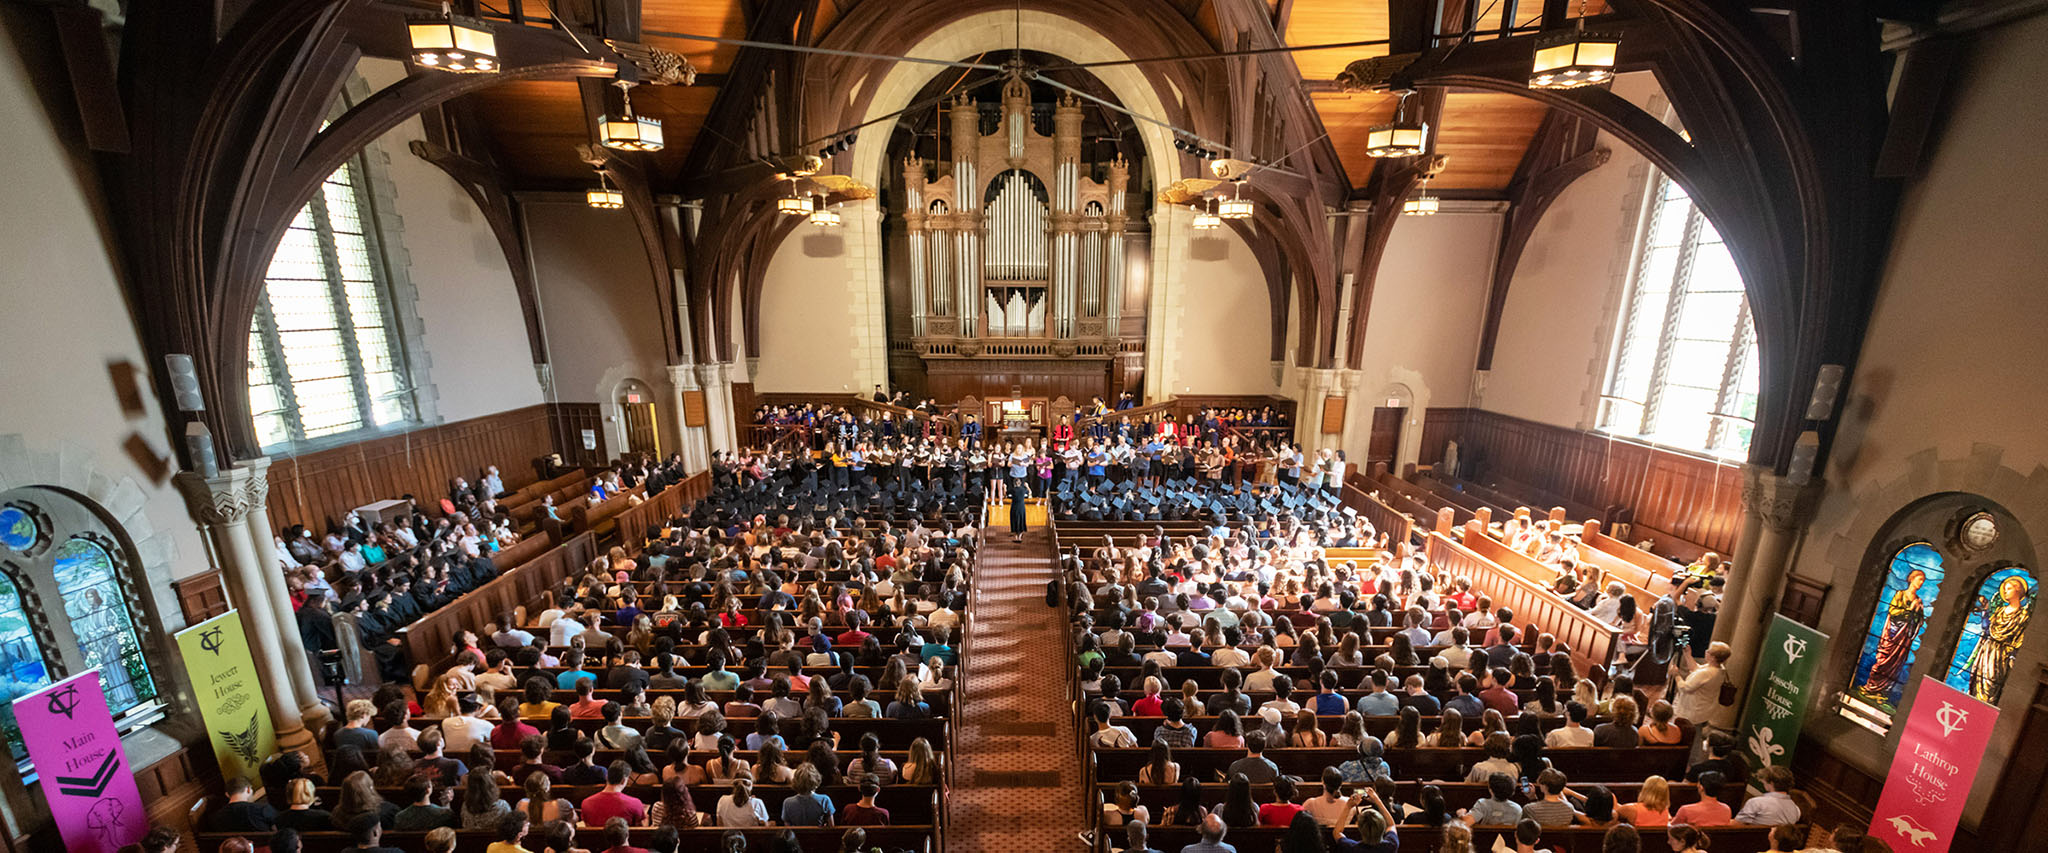 Interior of Chapel with the audience for Convocation